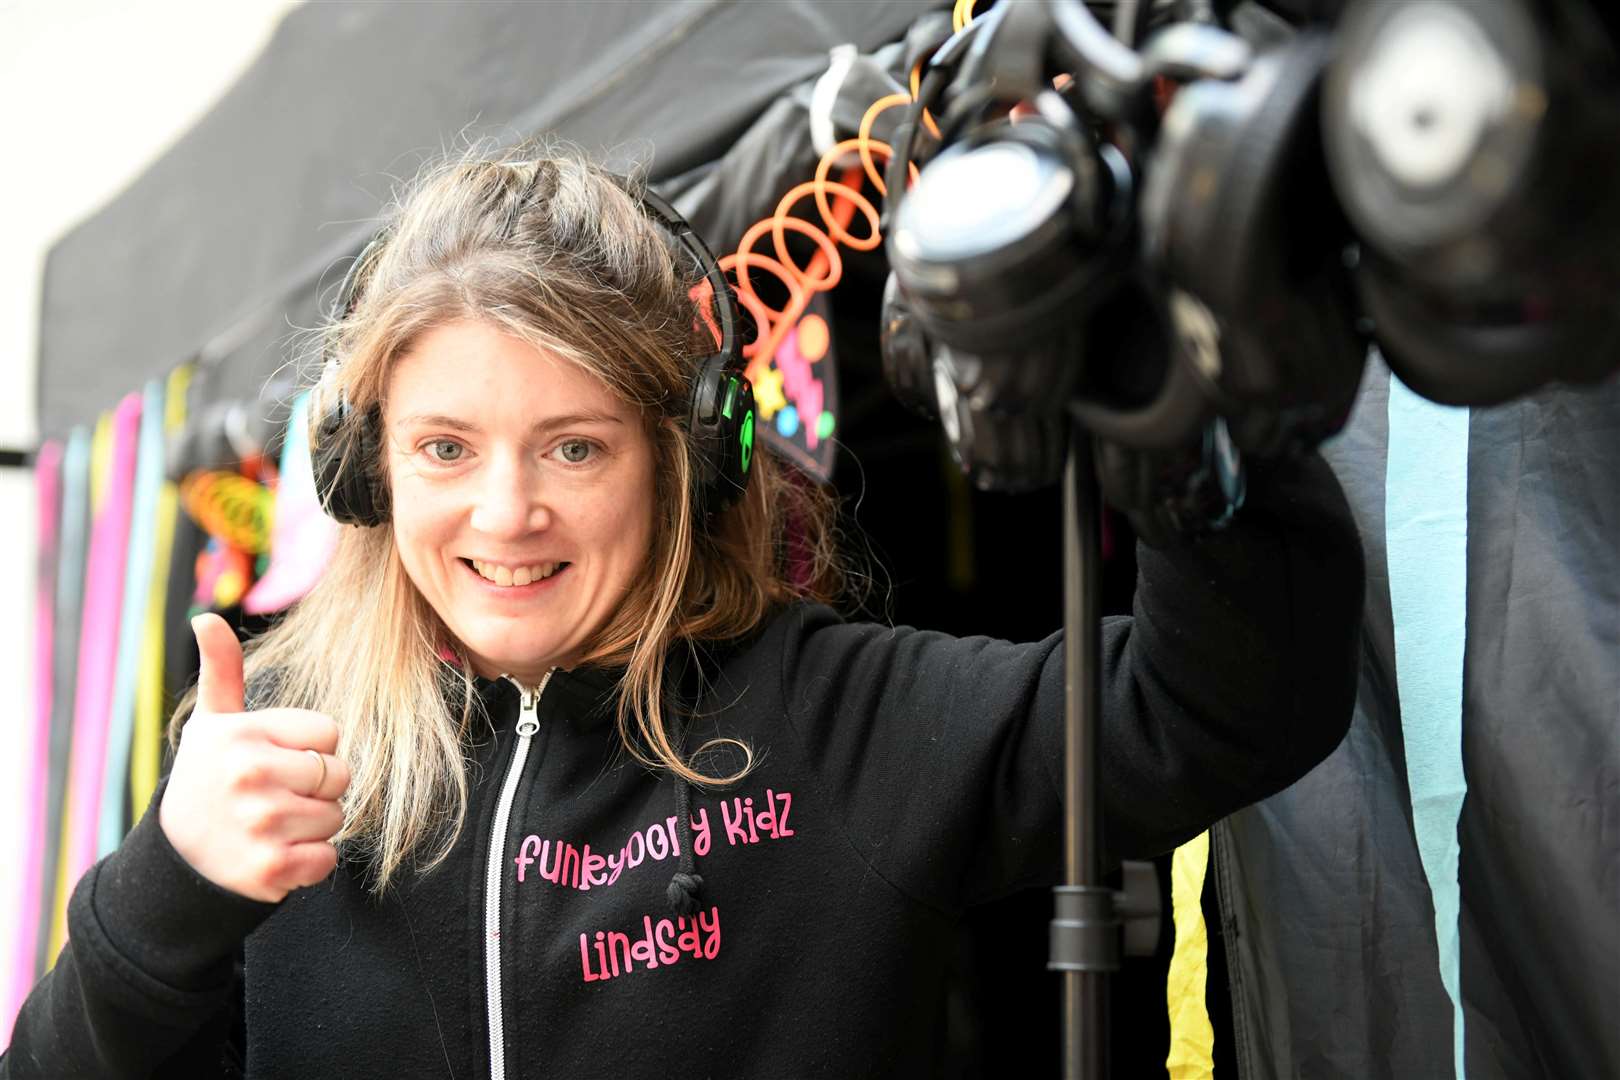 As well as boxing at a high level and being a mum to four, Lindsay Fulton runs Funkydory Kidz. Picture: Callum Mackay